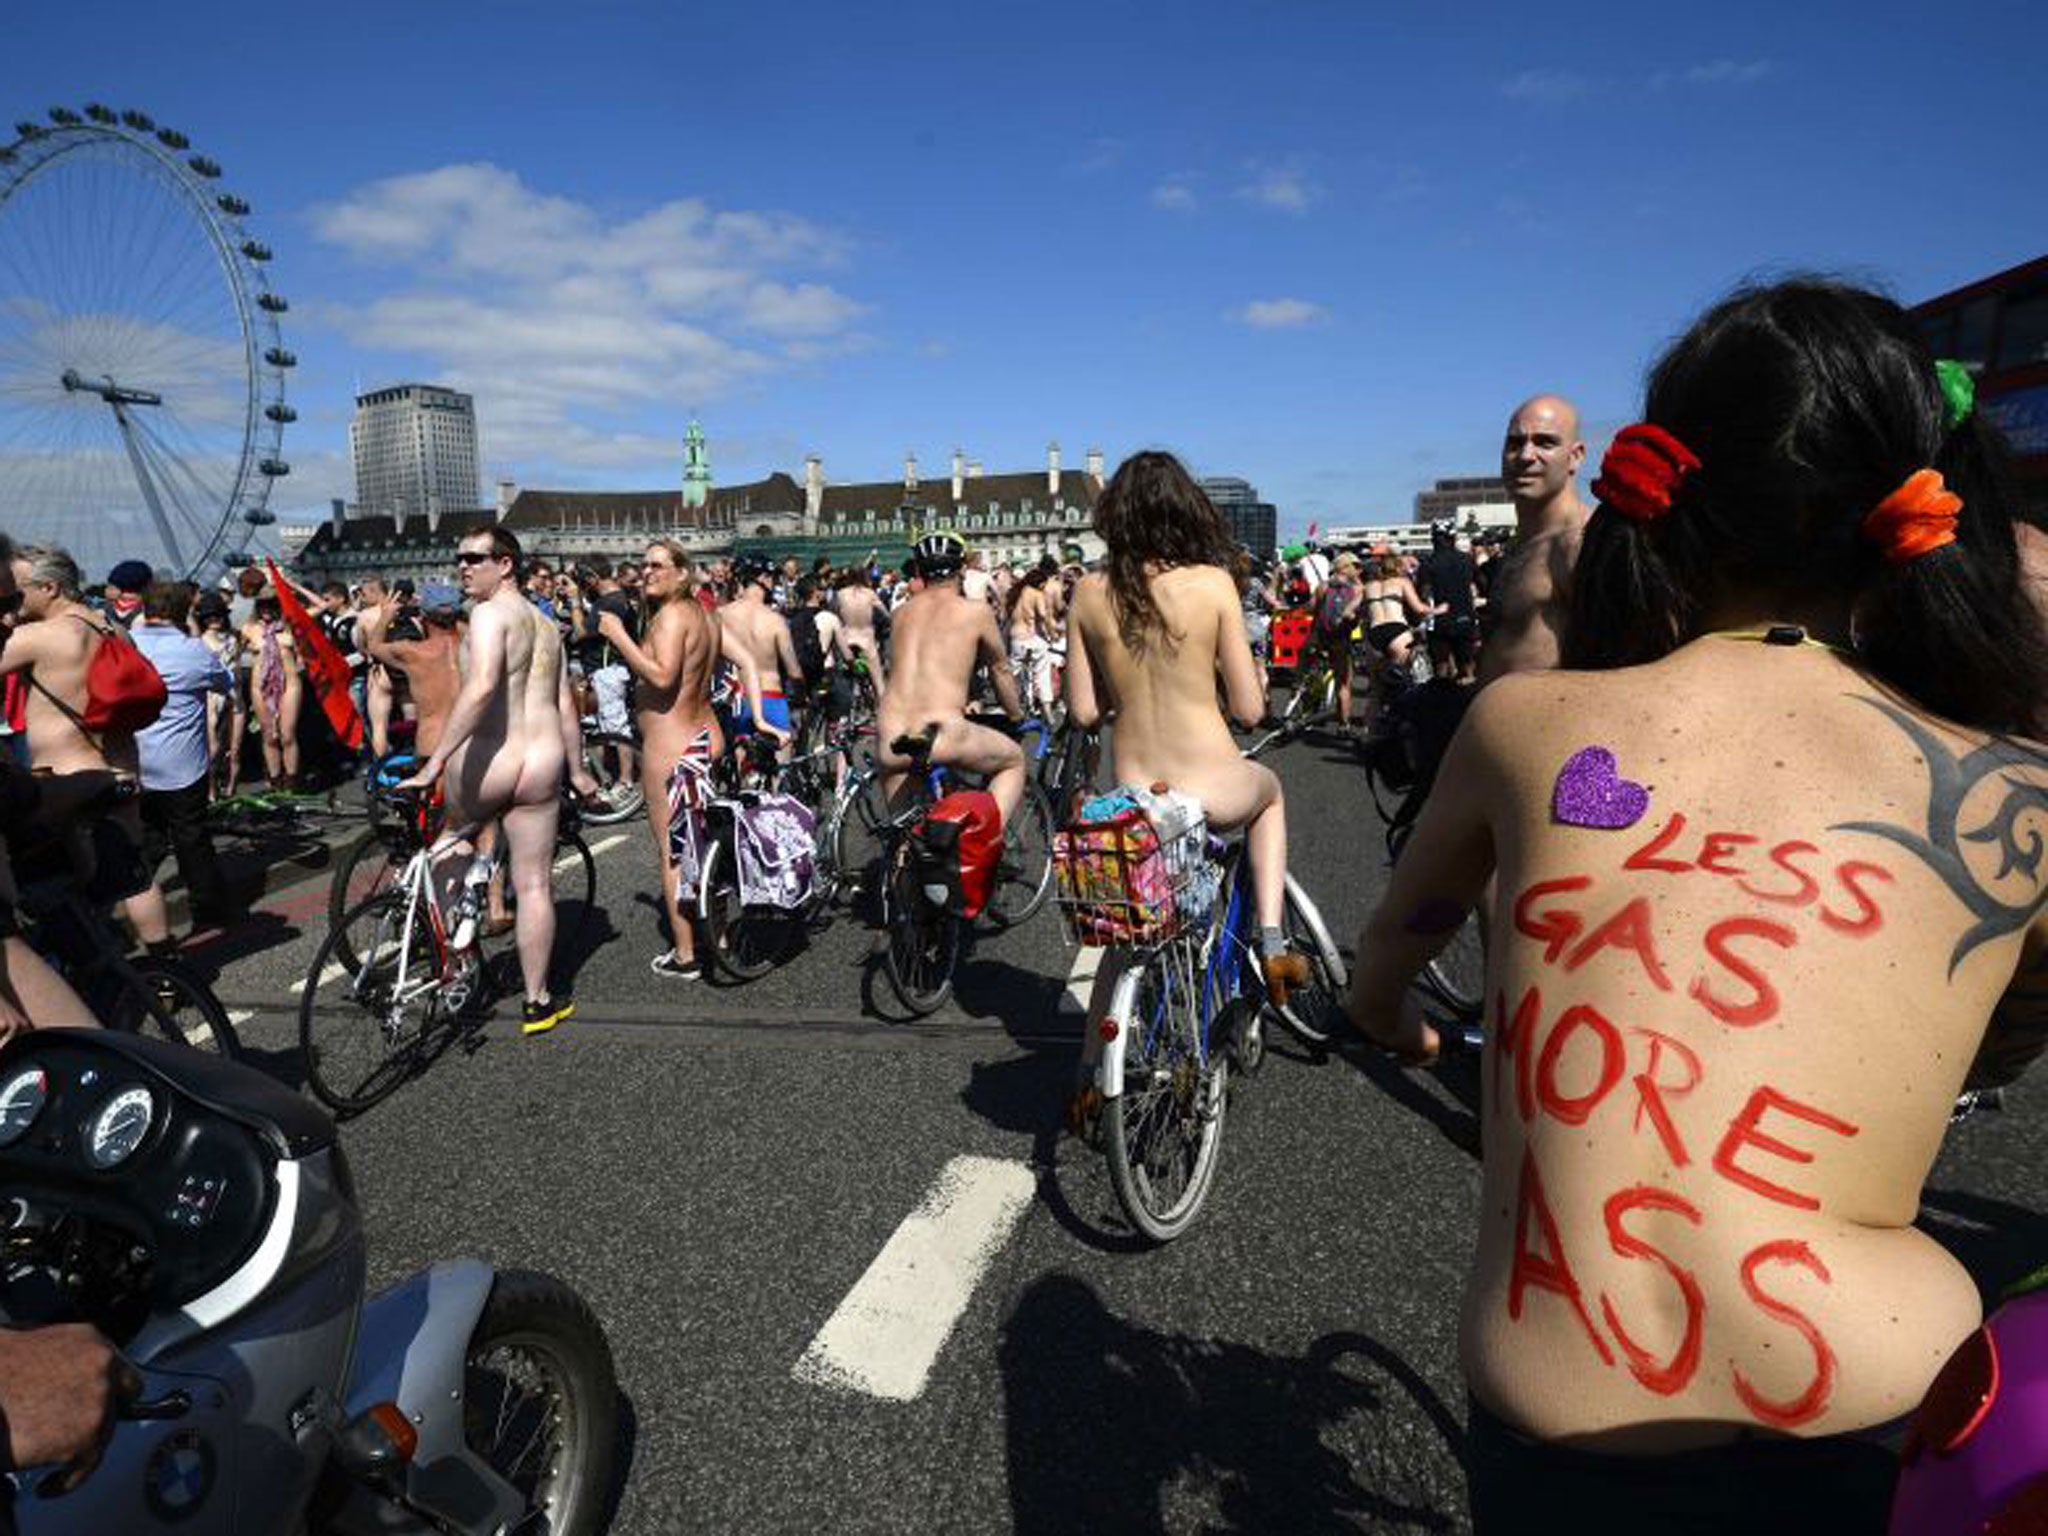 Look Mum, no pants! The rise of naked bike ride protests The Independent The Independent pic